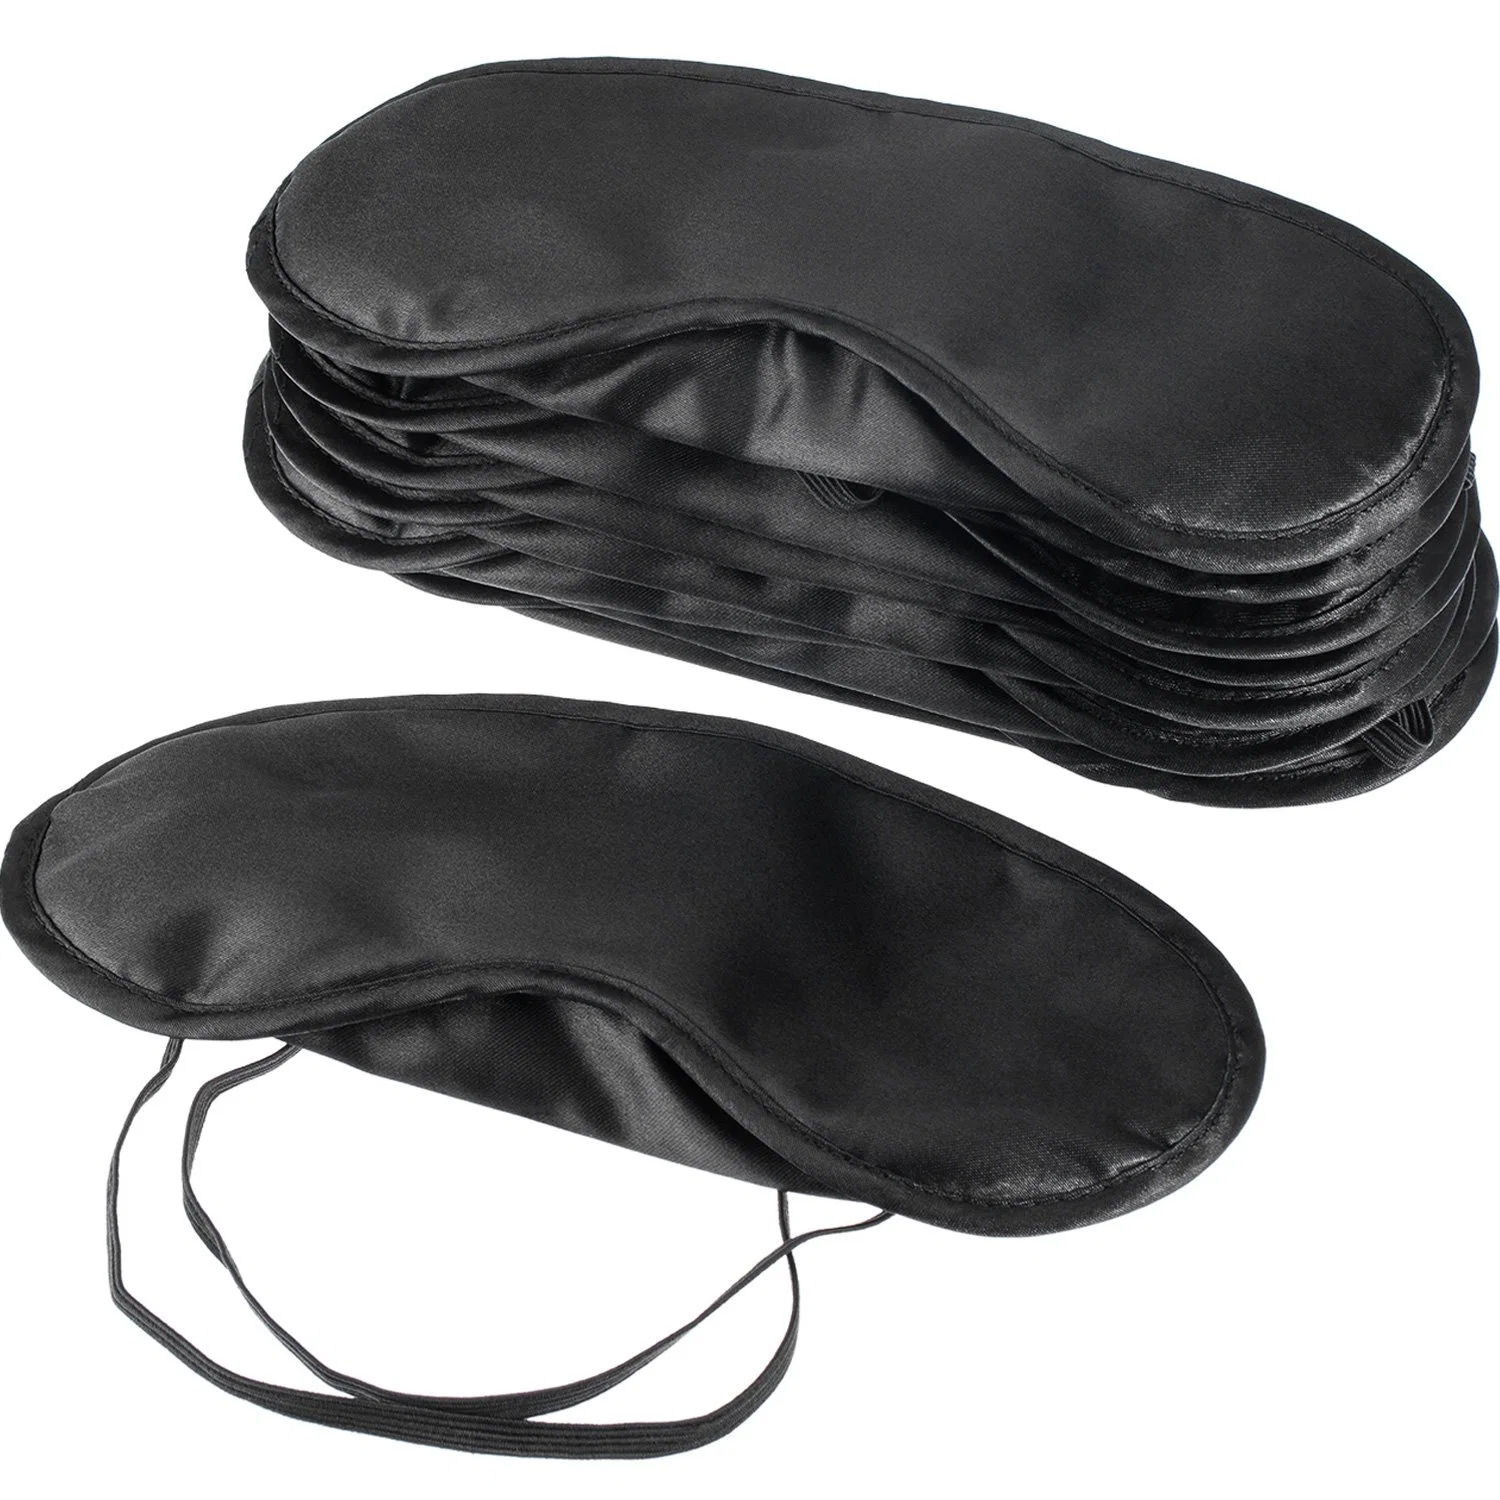 Wholesale Custom High Quality 10 Pack Mudder Blindfold Eye Mask Shade Cover for Sleeping with Nose Pad